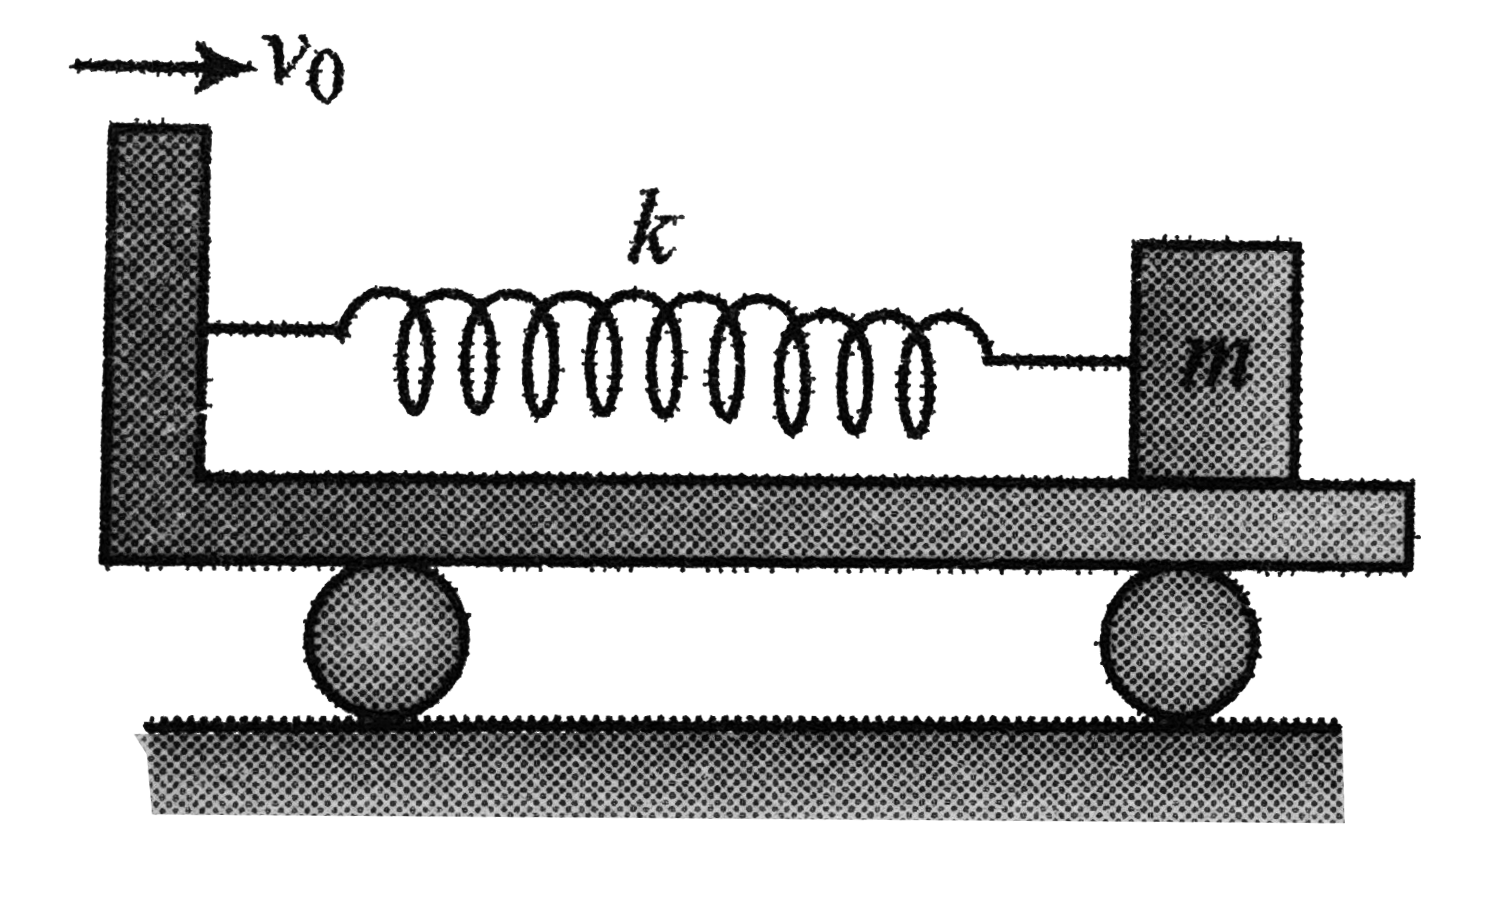 A block of mass m is connected rigidly with a smooth wedge (plank) by a light spring of stiffness k. If the wedge is moved with constant velocity v0, find the work done by the external agent till the maximum compression of the spring.